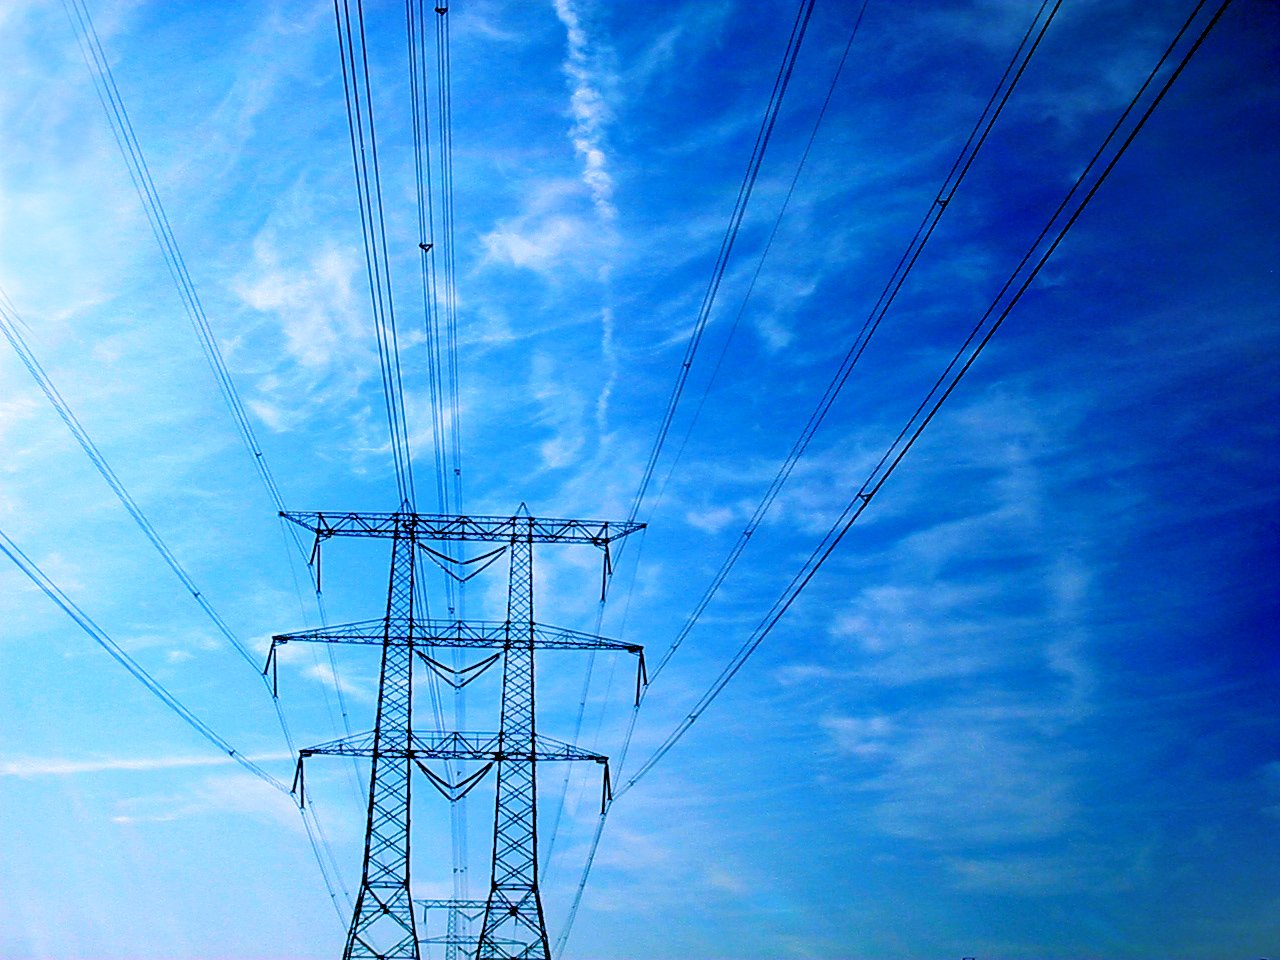 electric pylons are against the blue sky